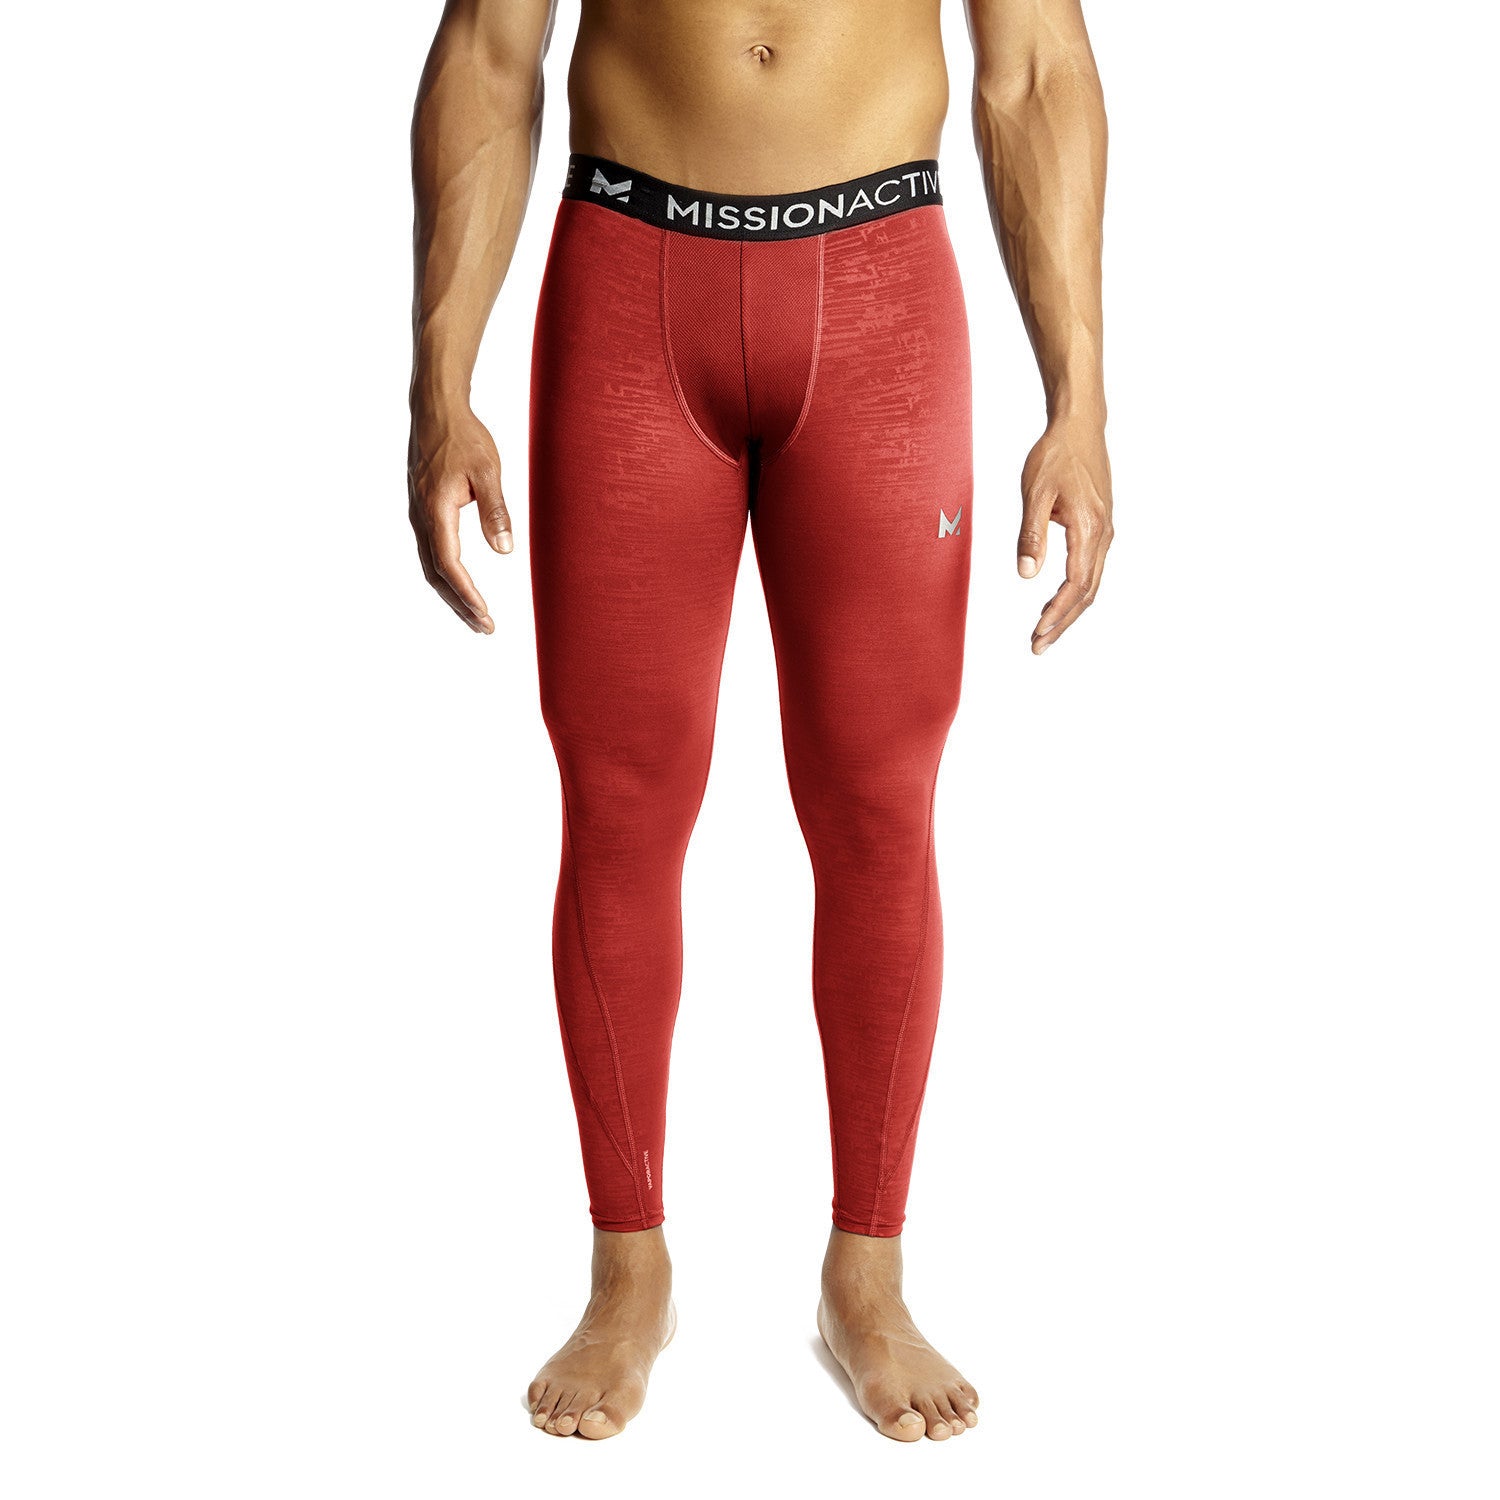 VaporActive Base Layer Tights | Red Shirts MissionActive M Red 